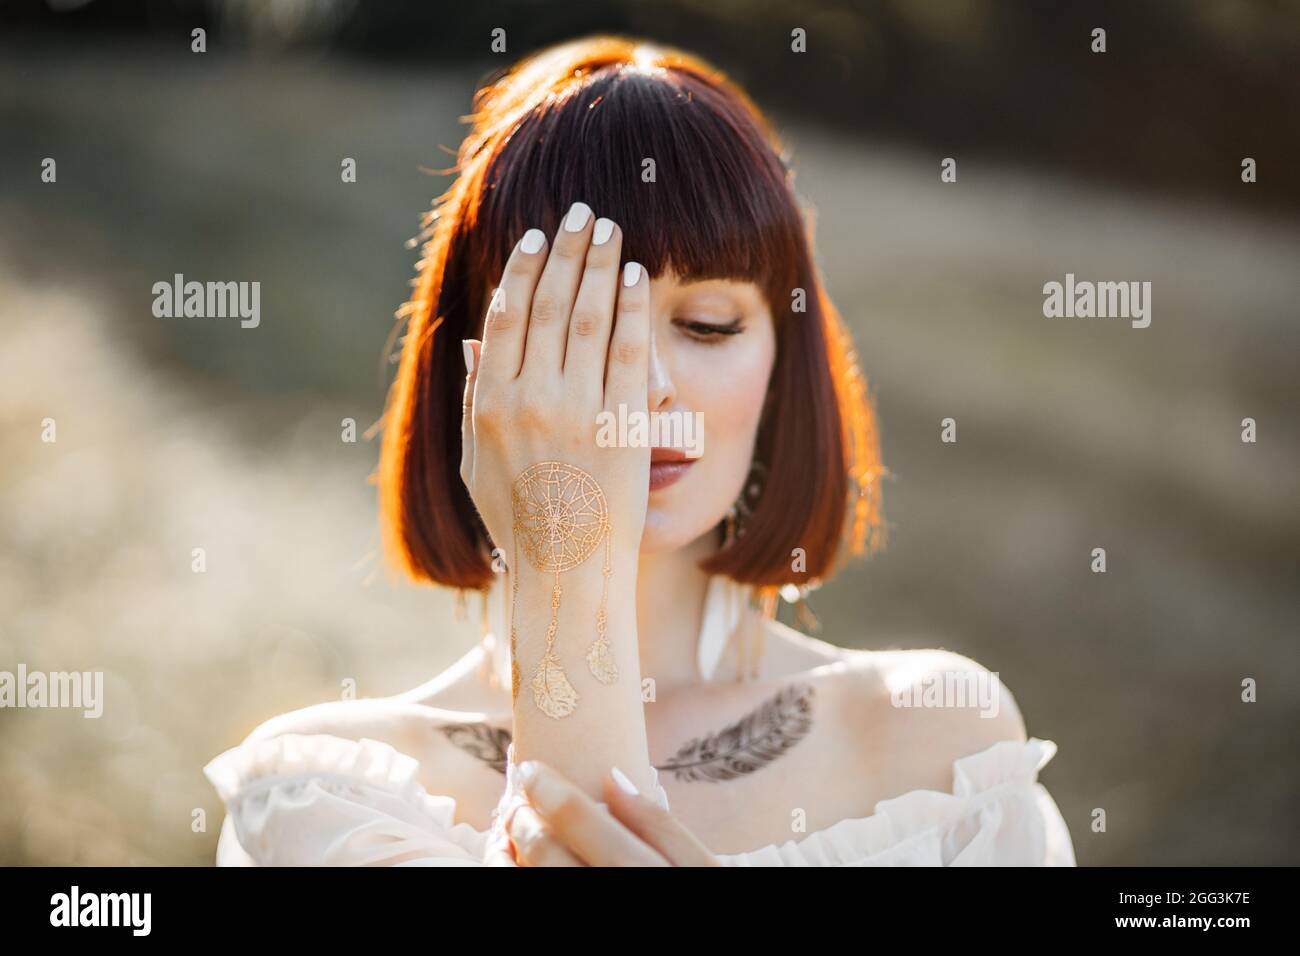 Close up creative portrait of native American Indian woman. Pretty ginger girl with short hair, and feather tattoos on neckline, looking down and covering half of her face with hand Stock Photo